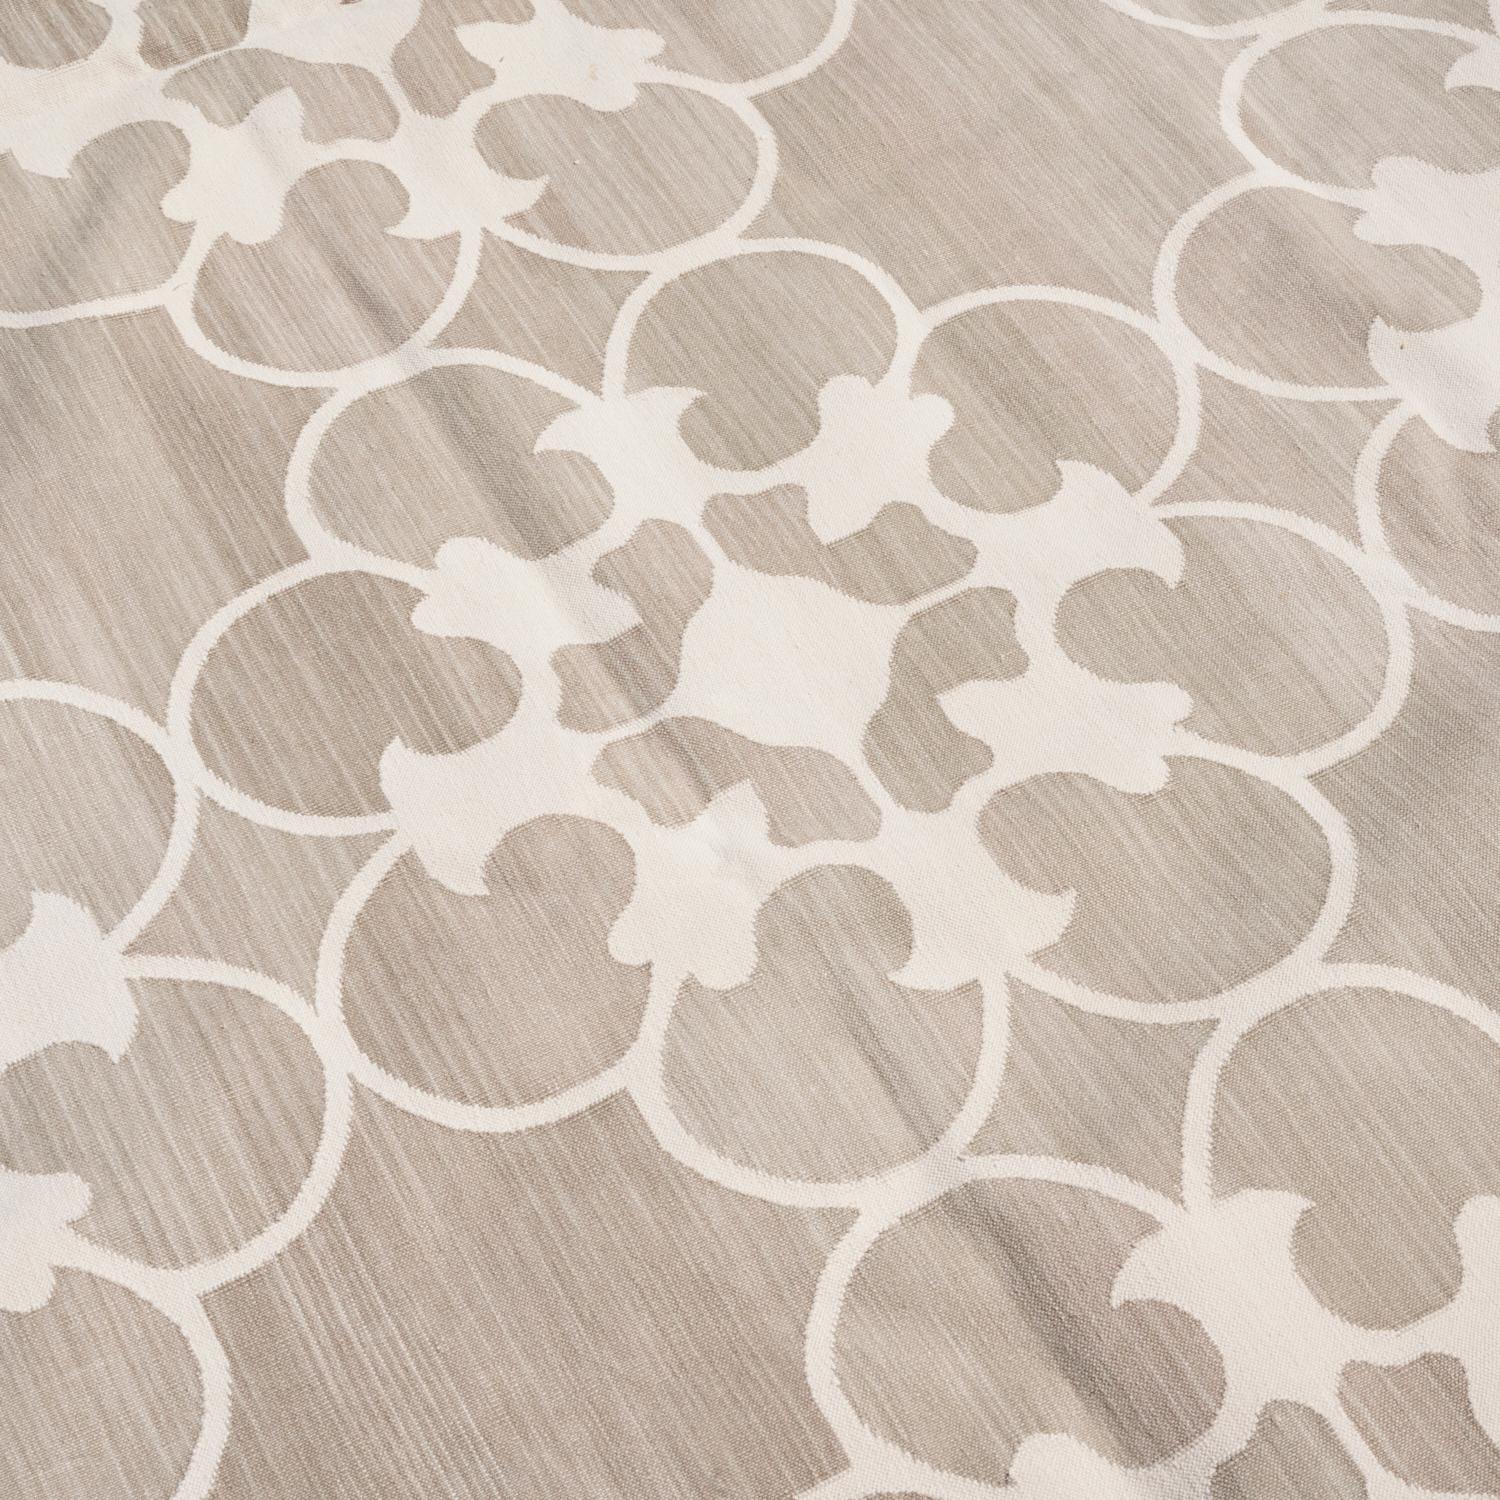 madeline weinrib rugs for sale